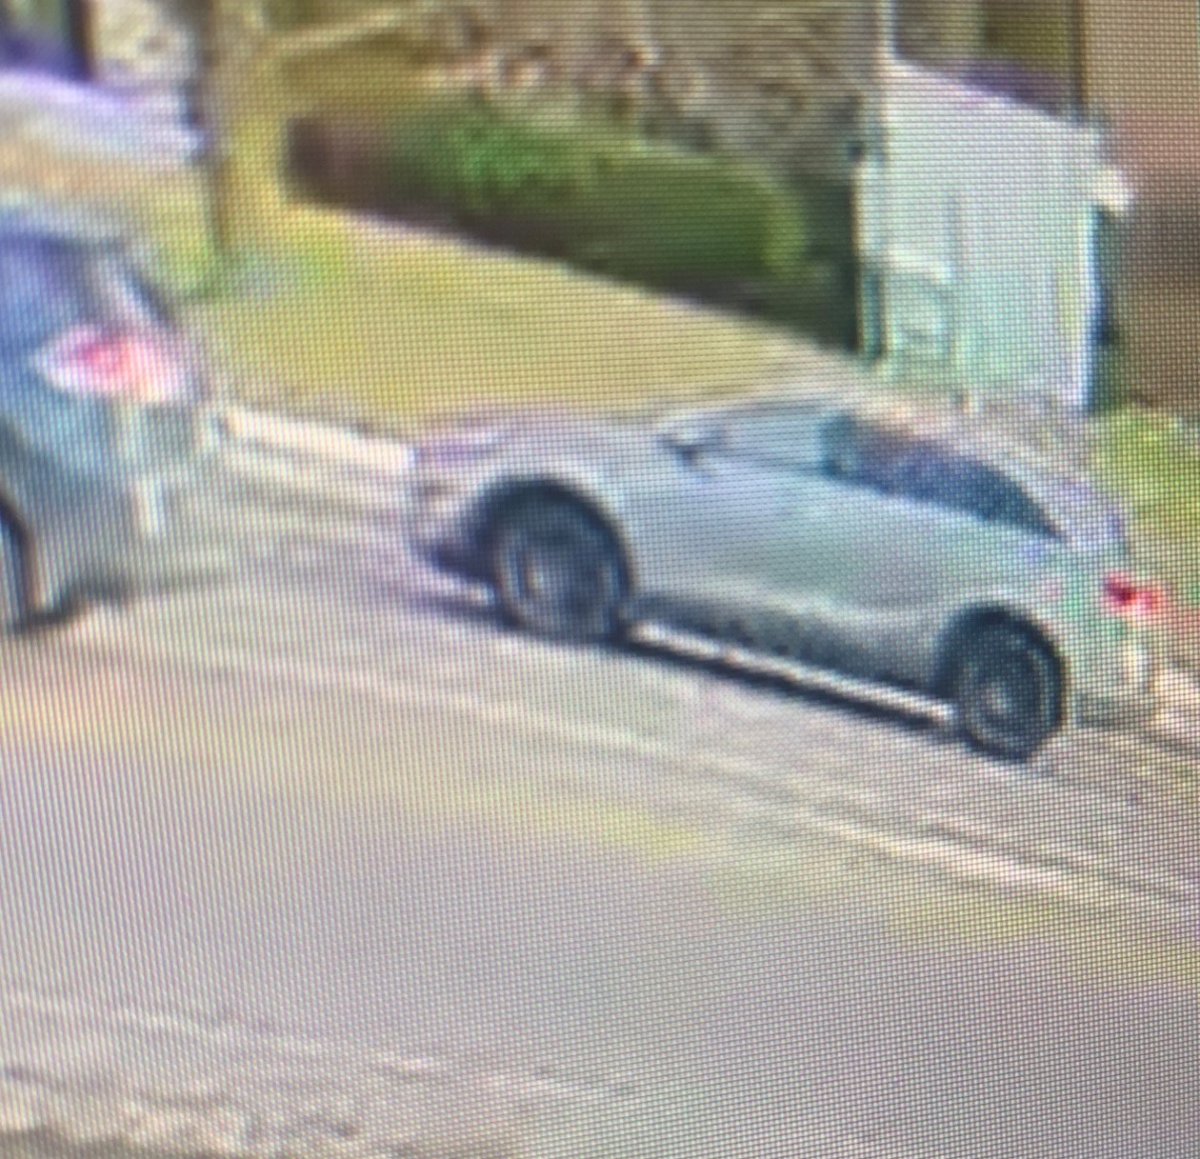 Guelph Police Service are looking for the driver of this SUV in connection to a hit and run investigation.